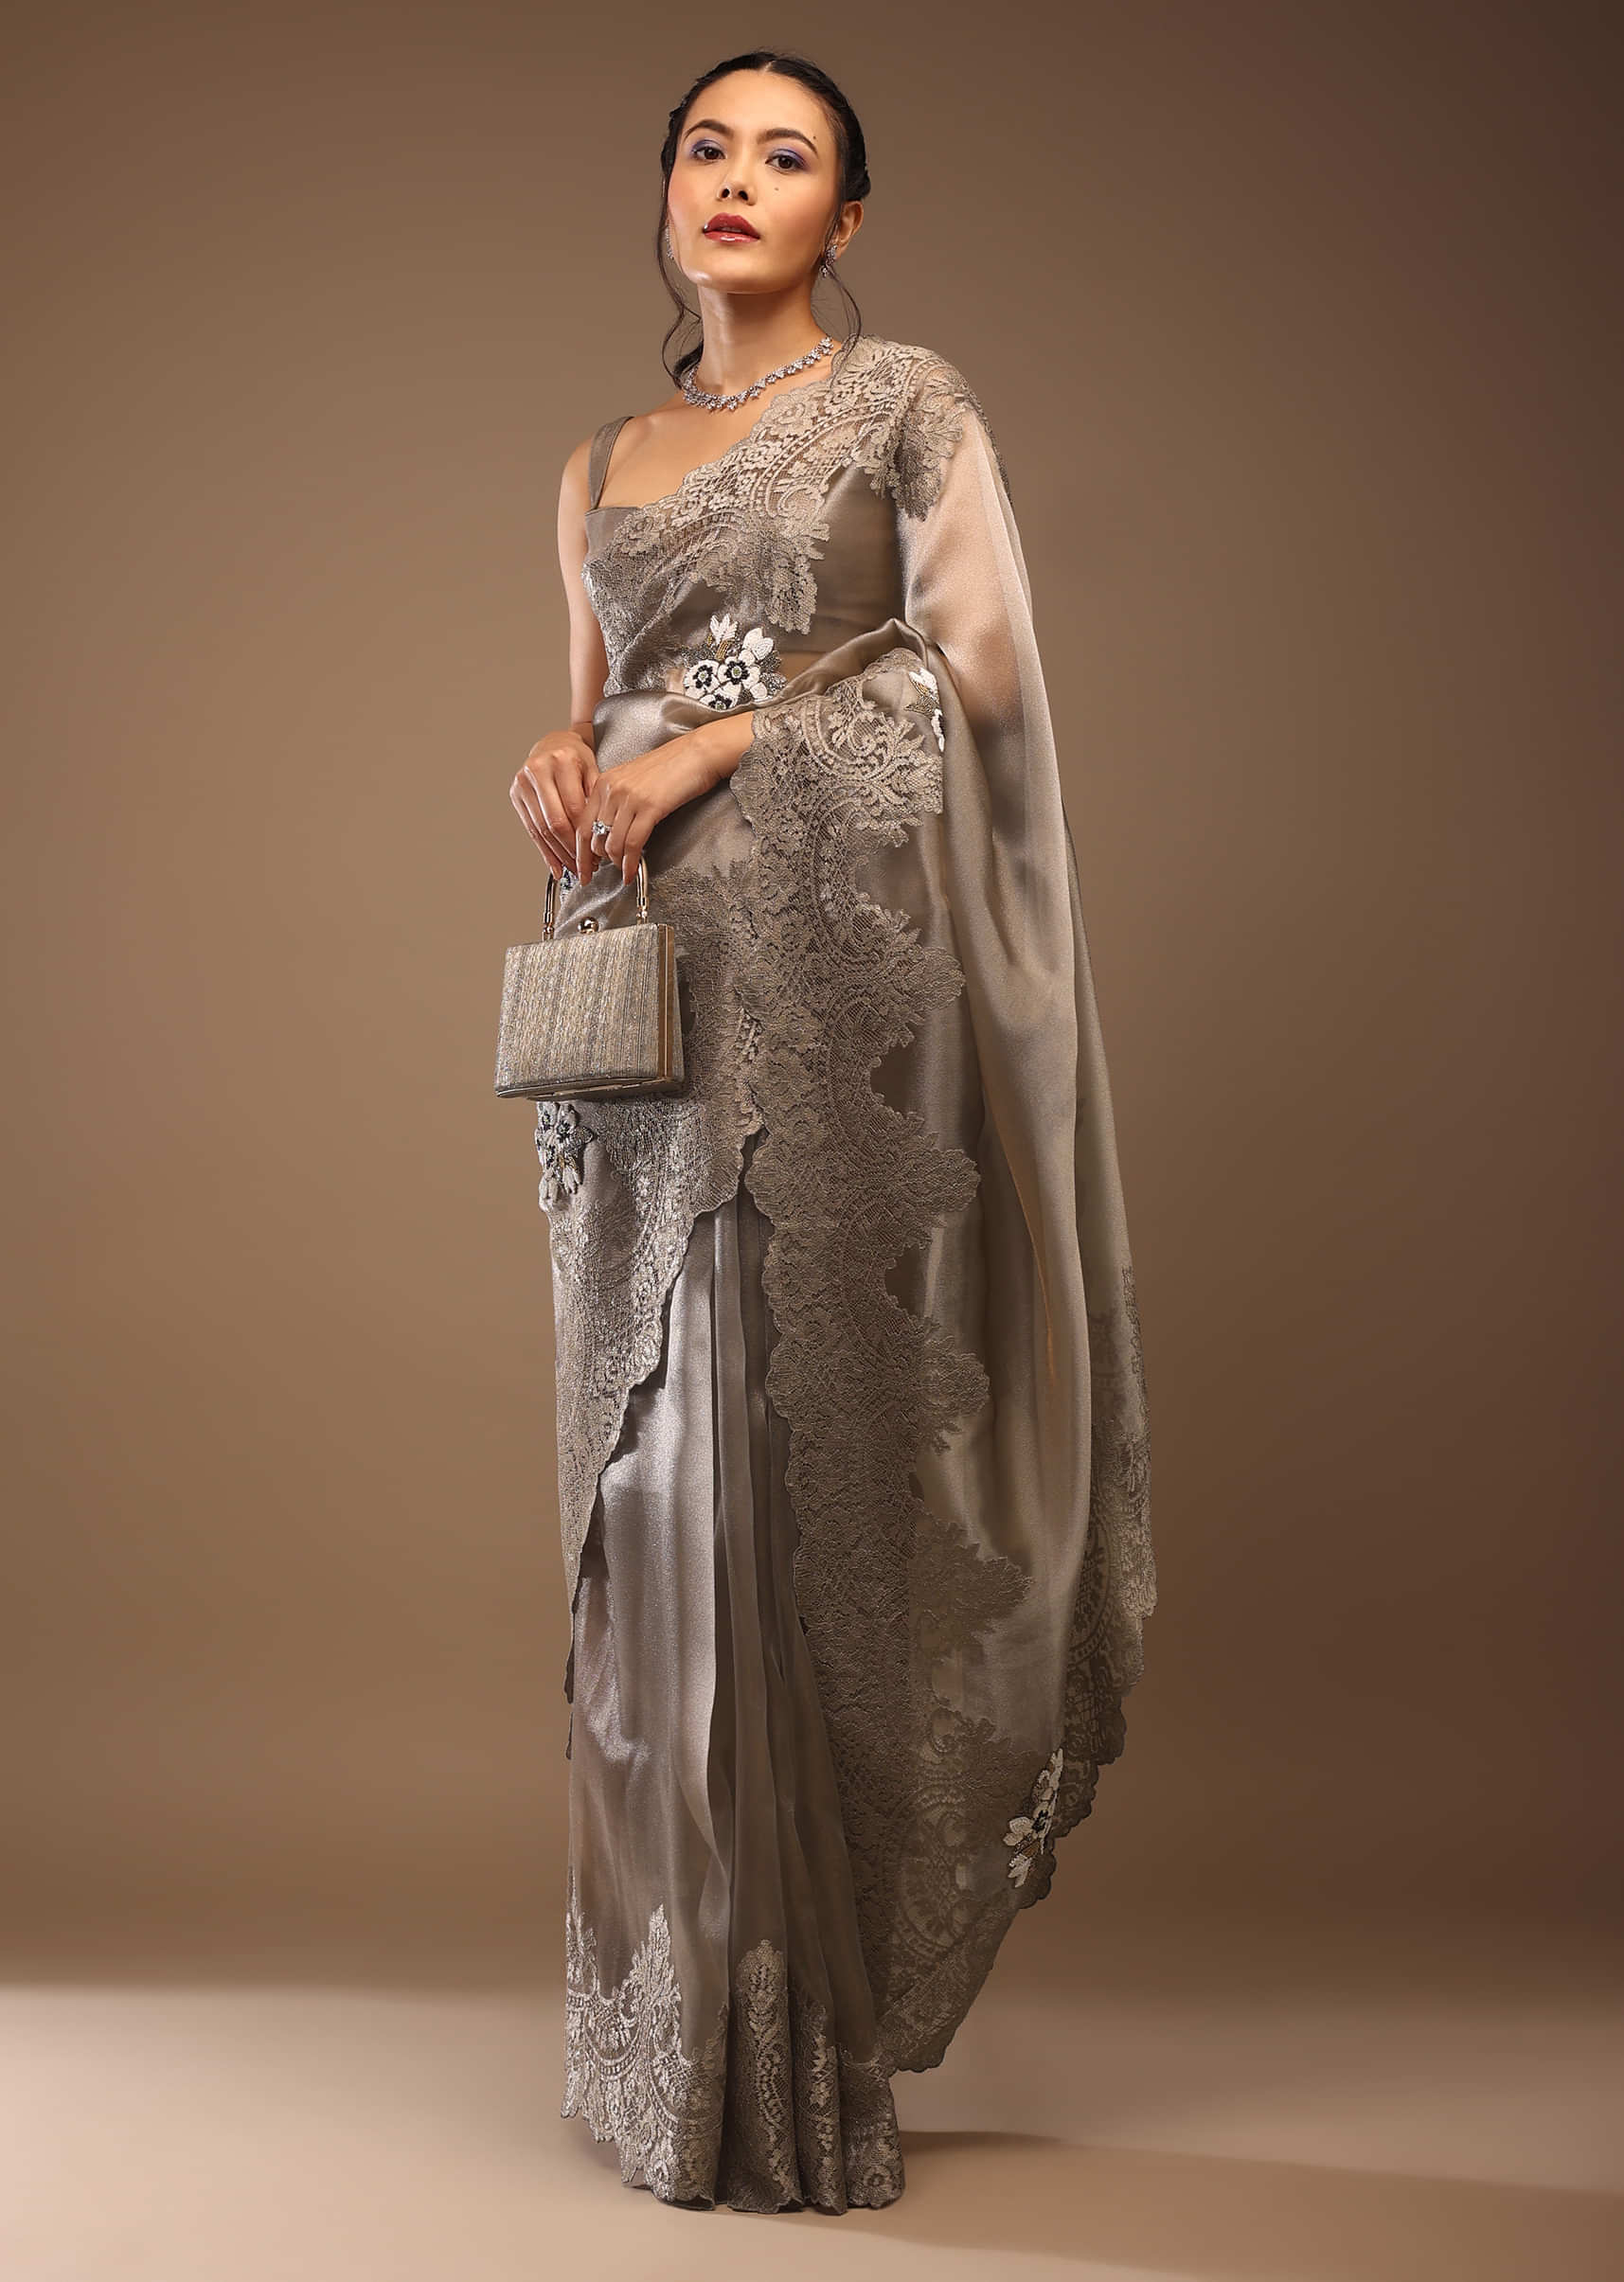 Ginger Brown Saree In Tissue Organza With Beaded And Cut Dana Embroidery Motifs, Crop Top Crafted In Raw Silk With A Corset Neckline